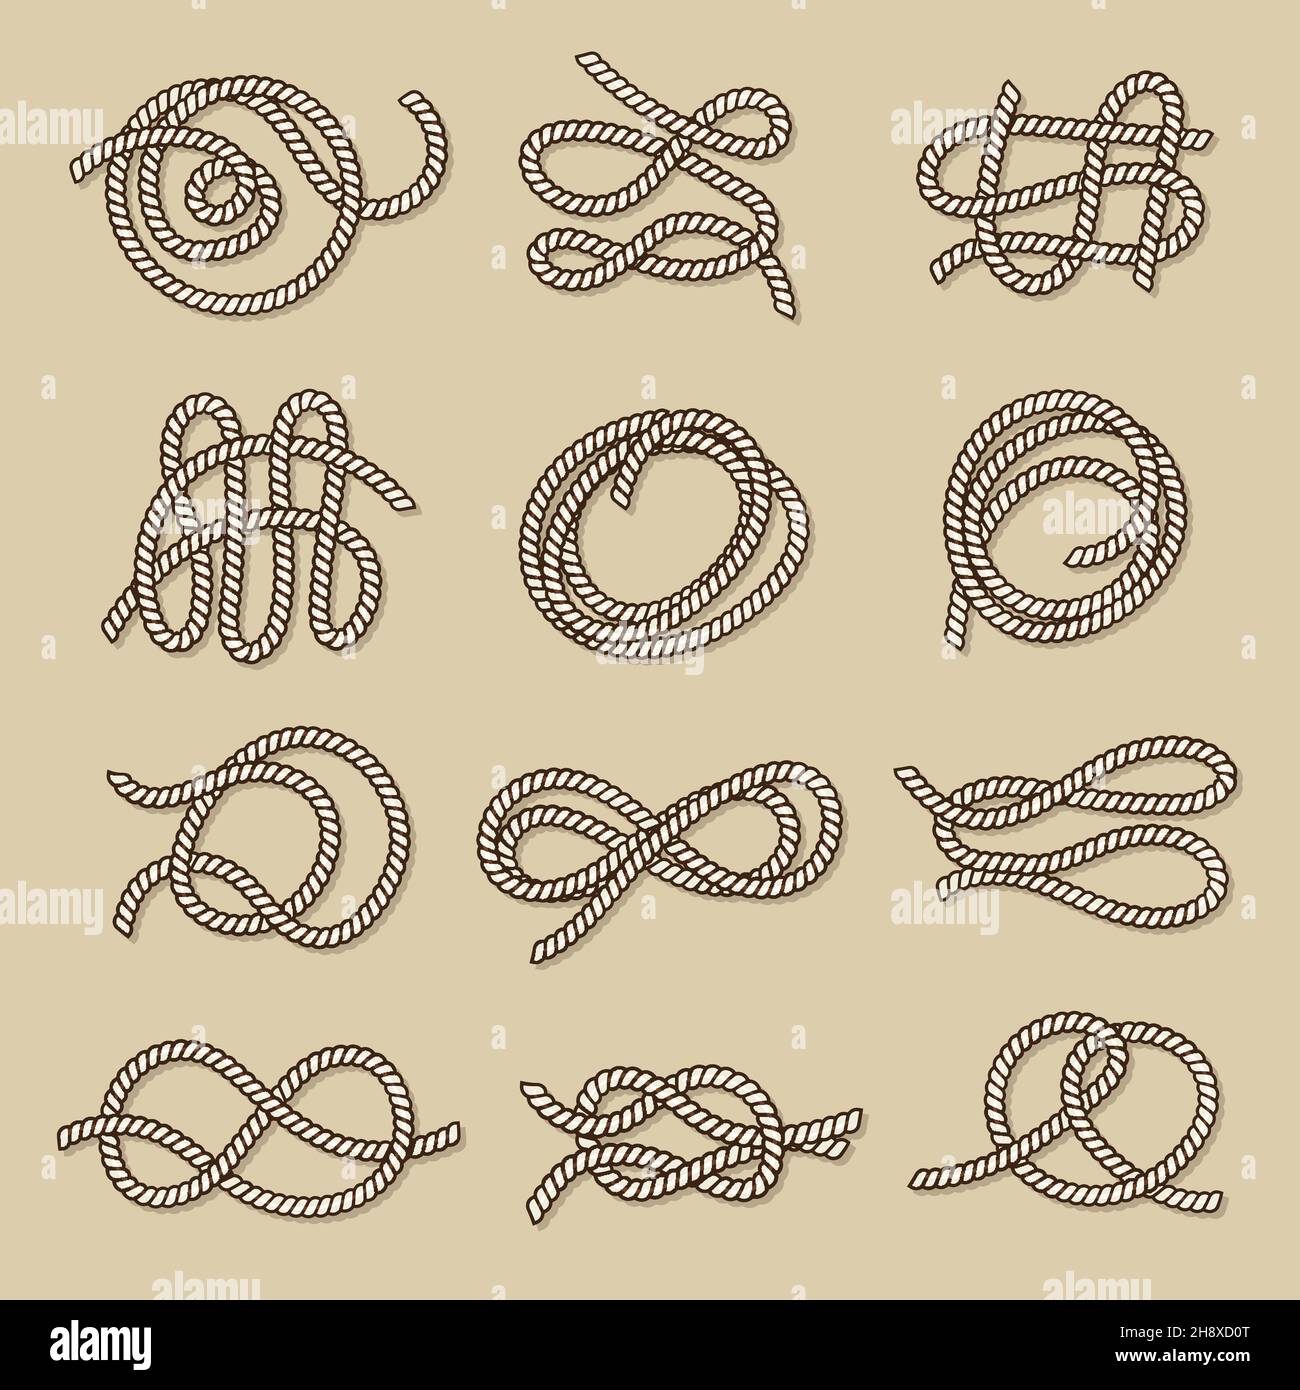 Rope shape. Abstract twisted cable or textile knots parts nautical symbols marine ropes recent vector illustration set Stock Vector